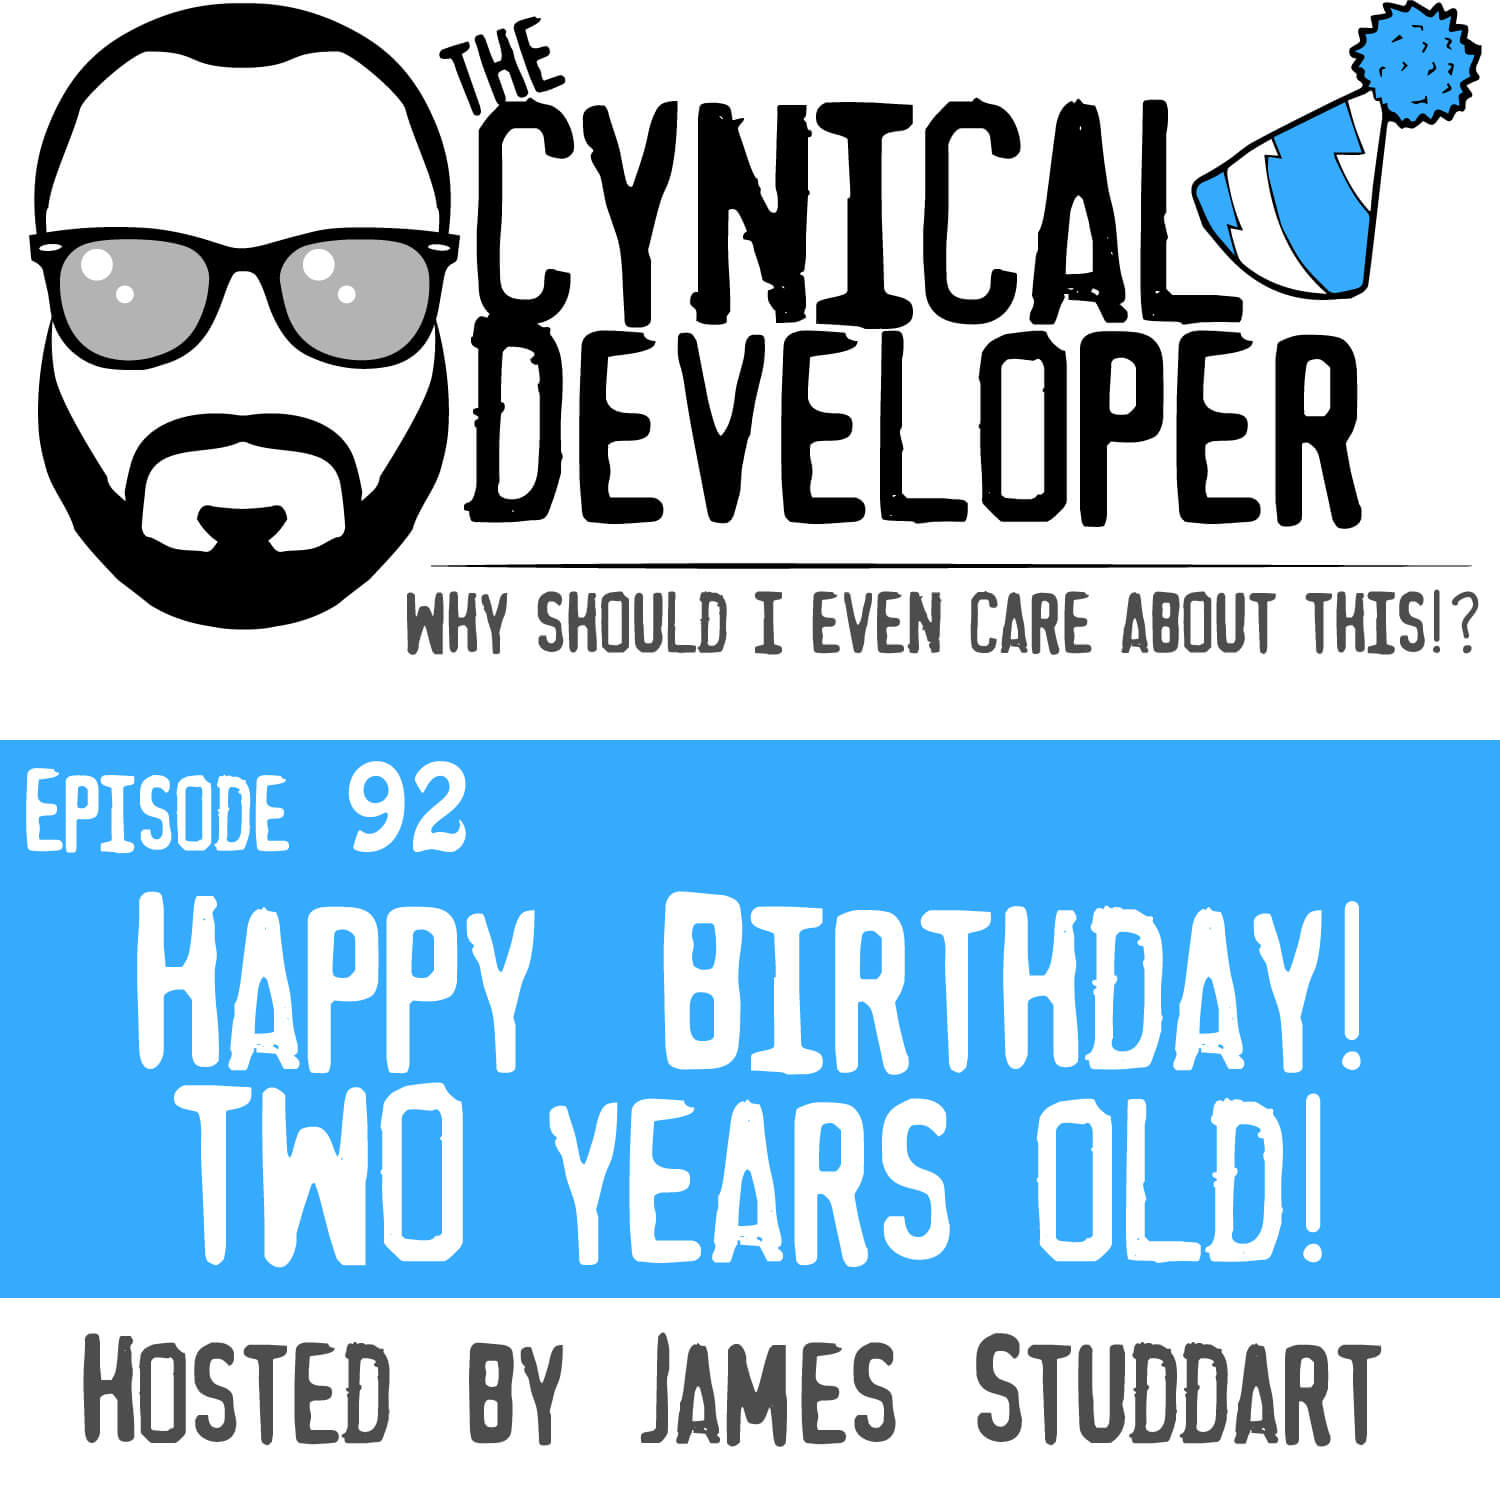 Episode 92 - Two years of the Cynical Developer